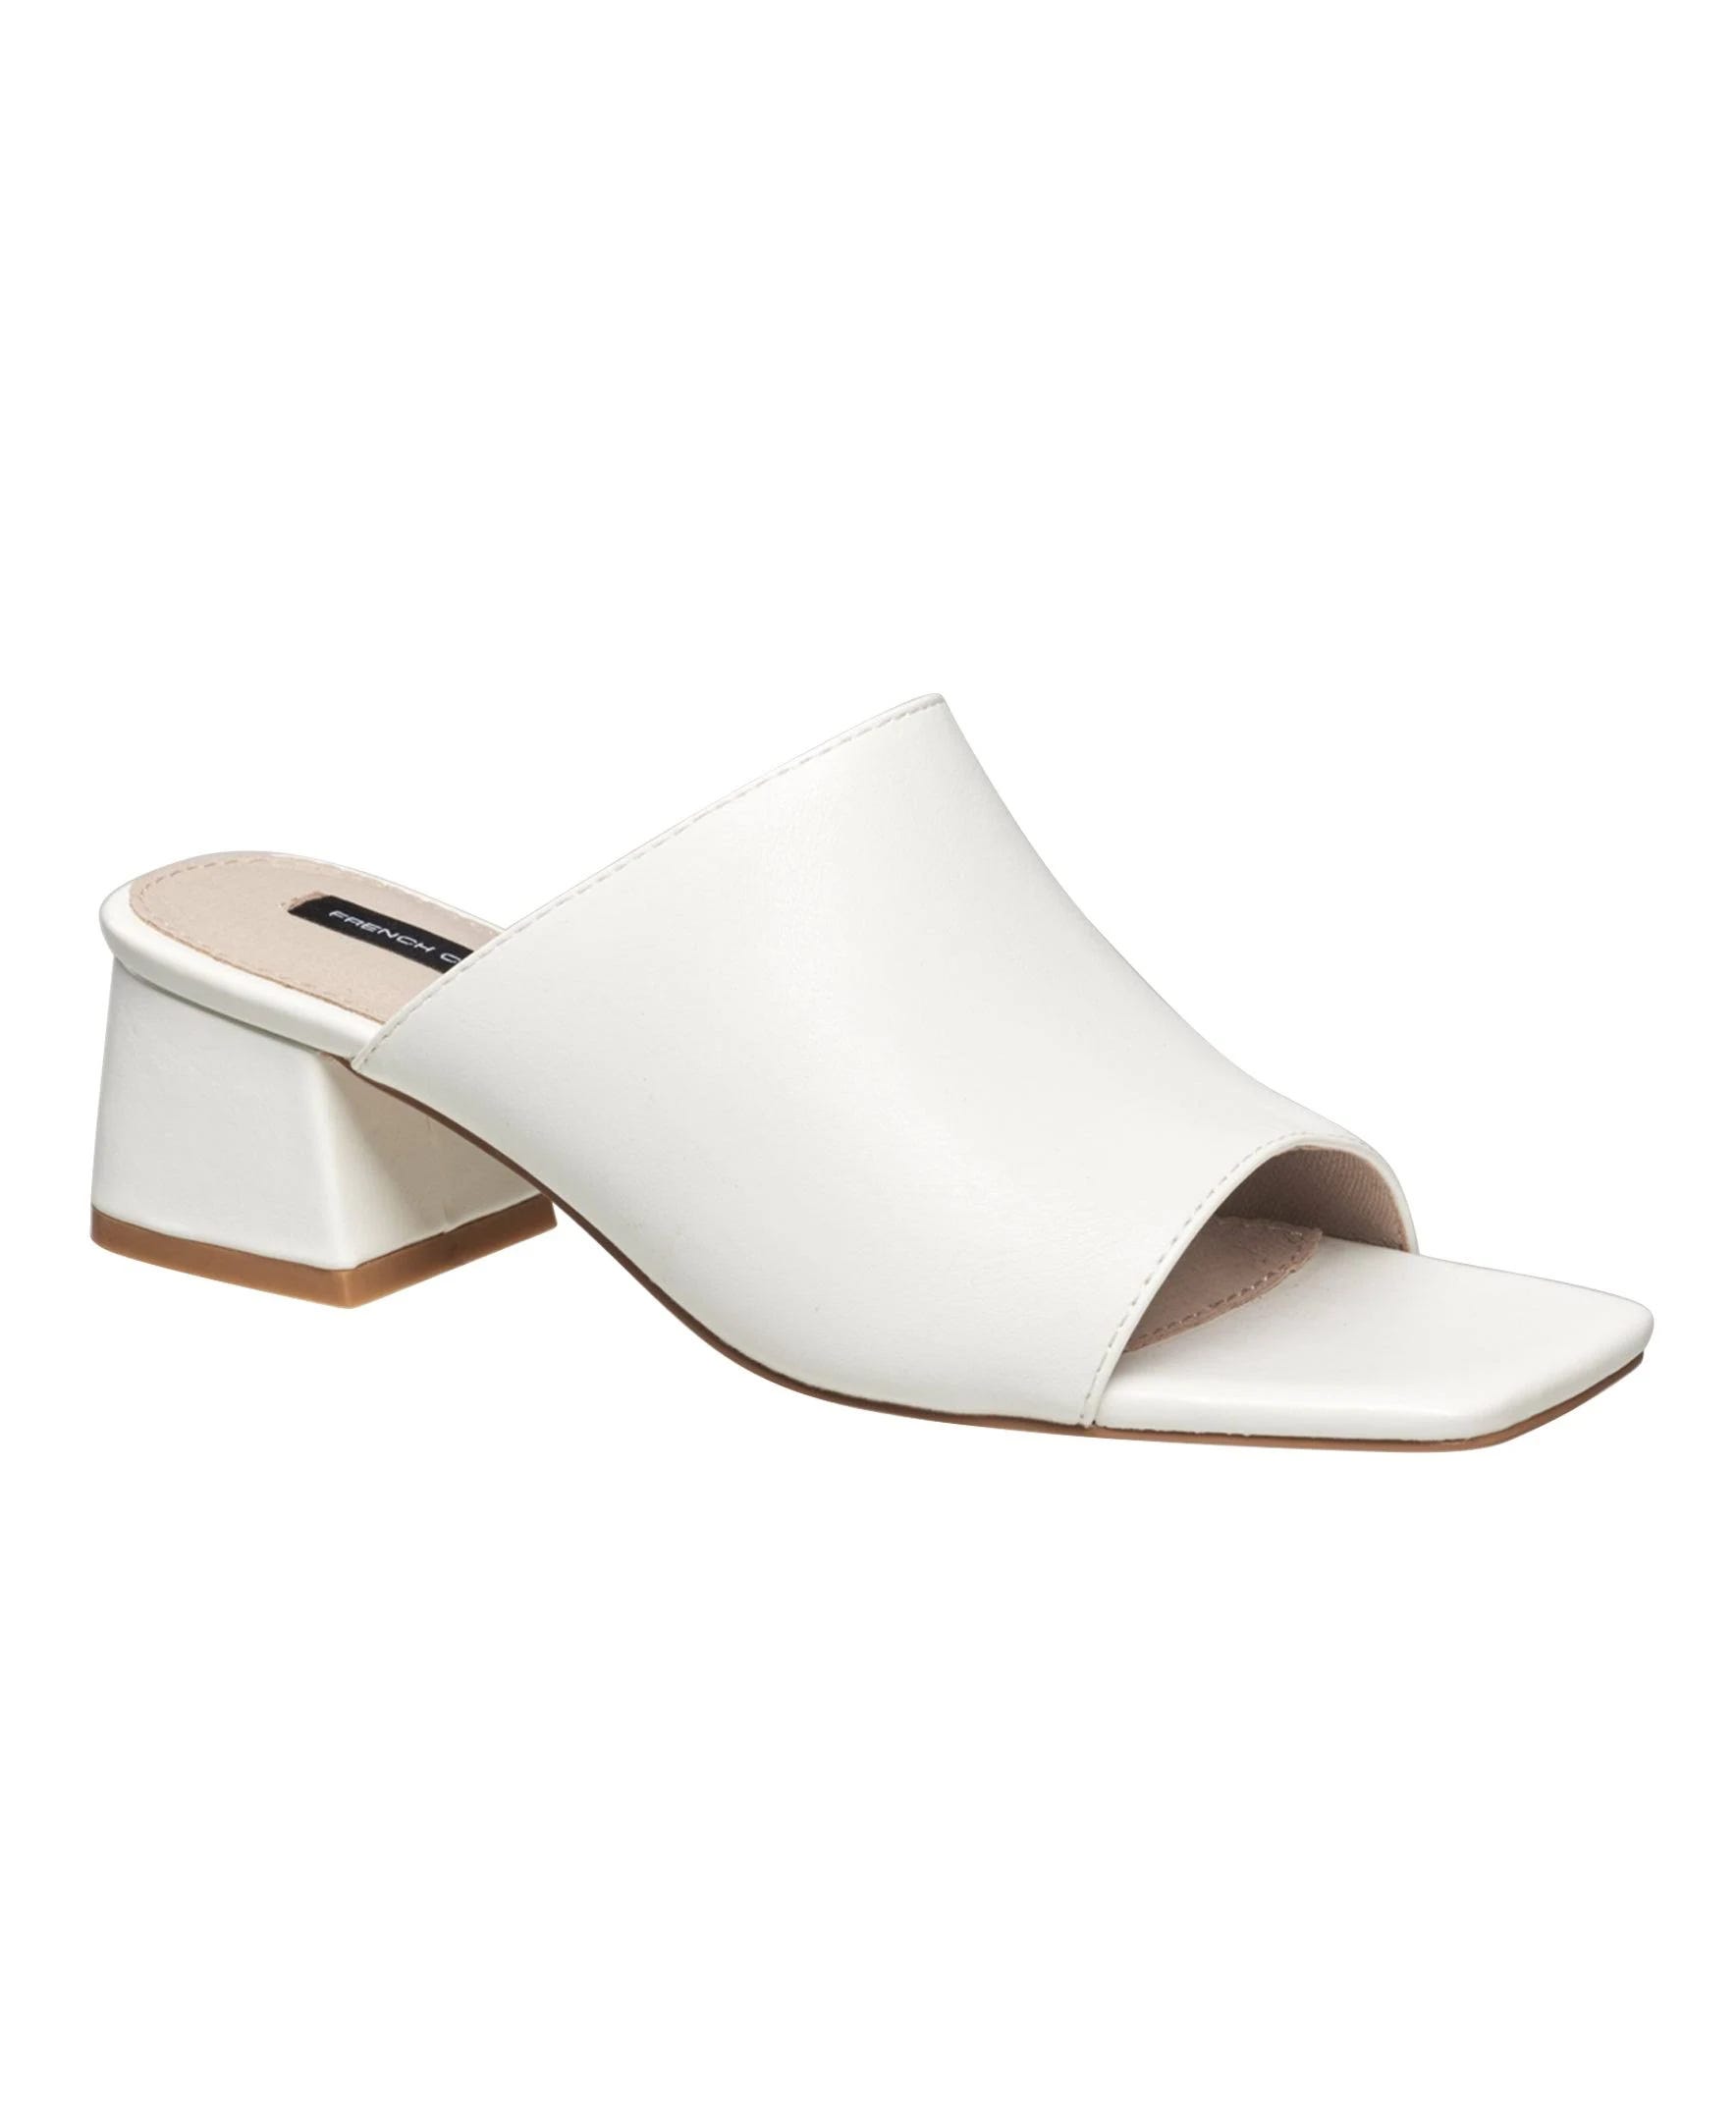 White Slide Heels from French Connection for Dressy Occasions | Image